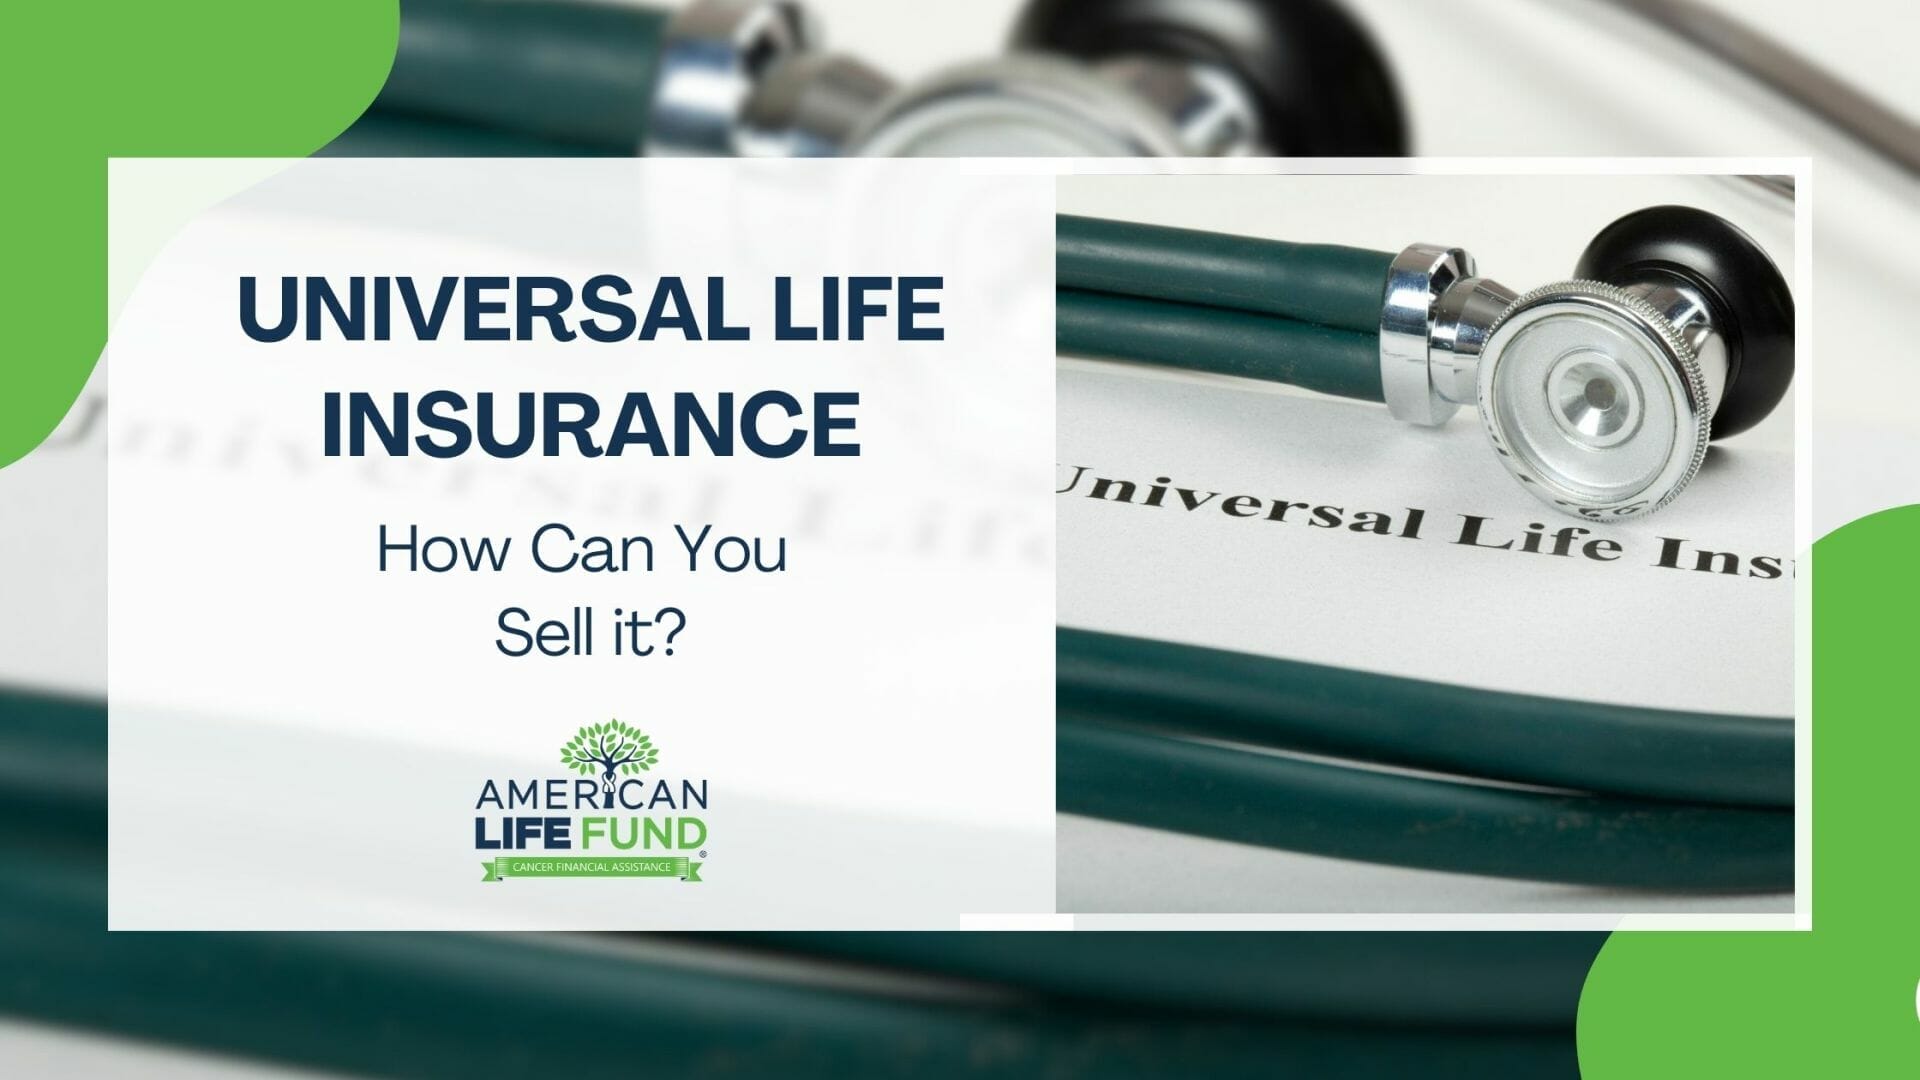 Can I Sell Universal Life Insurance Policy For Cash?